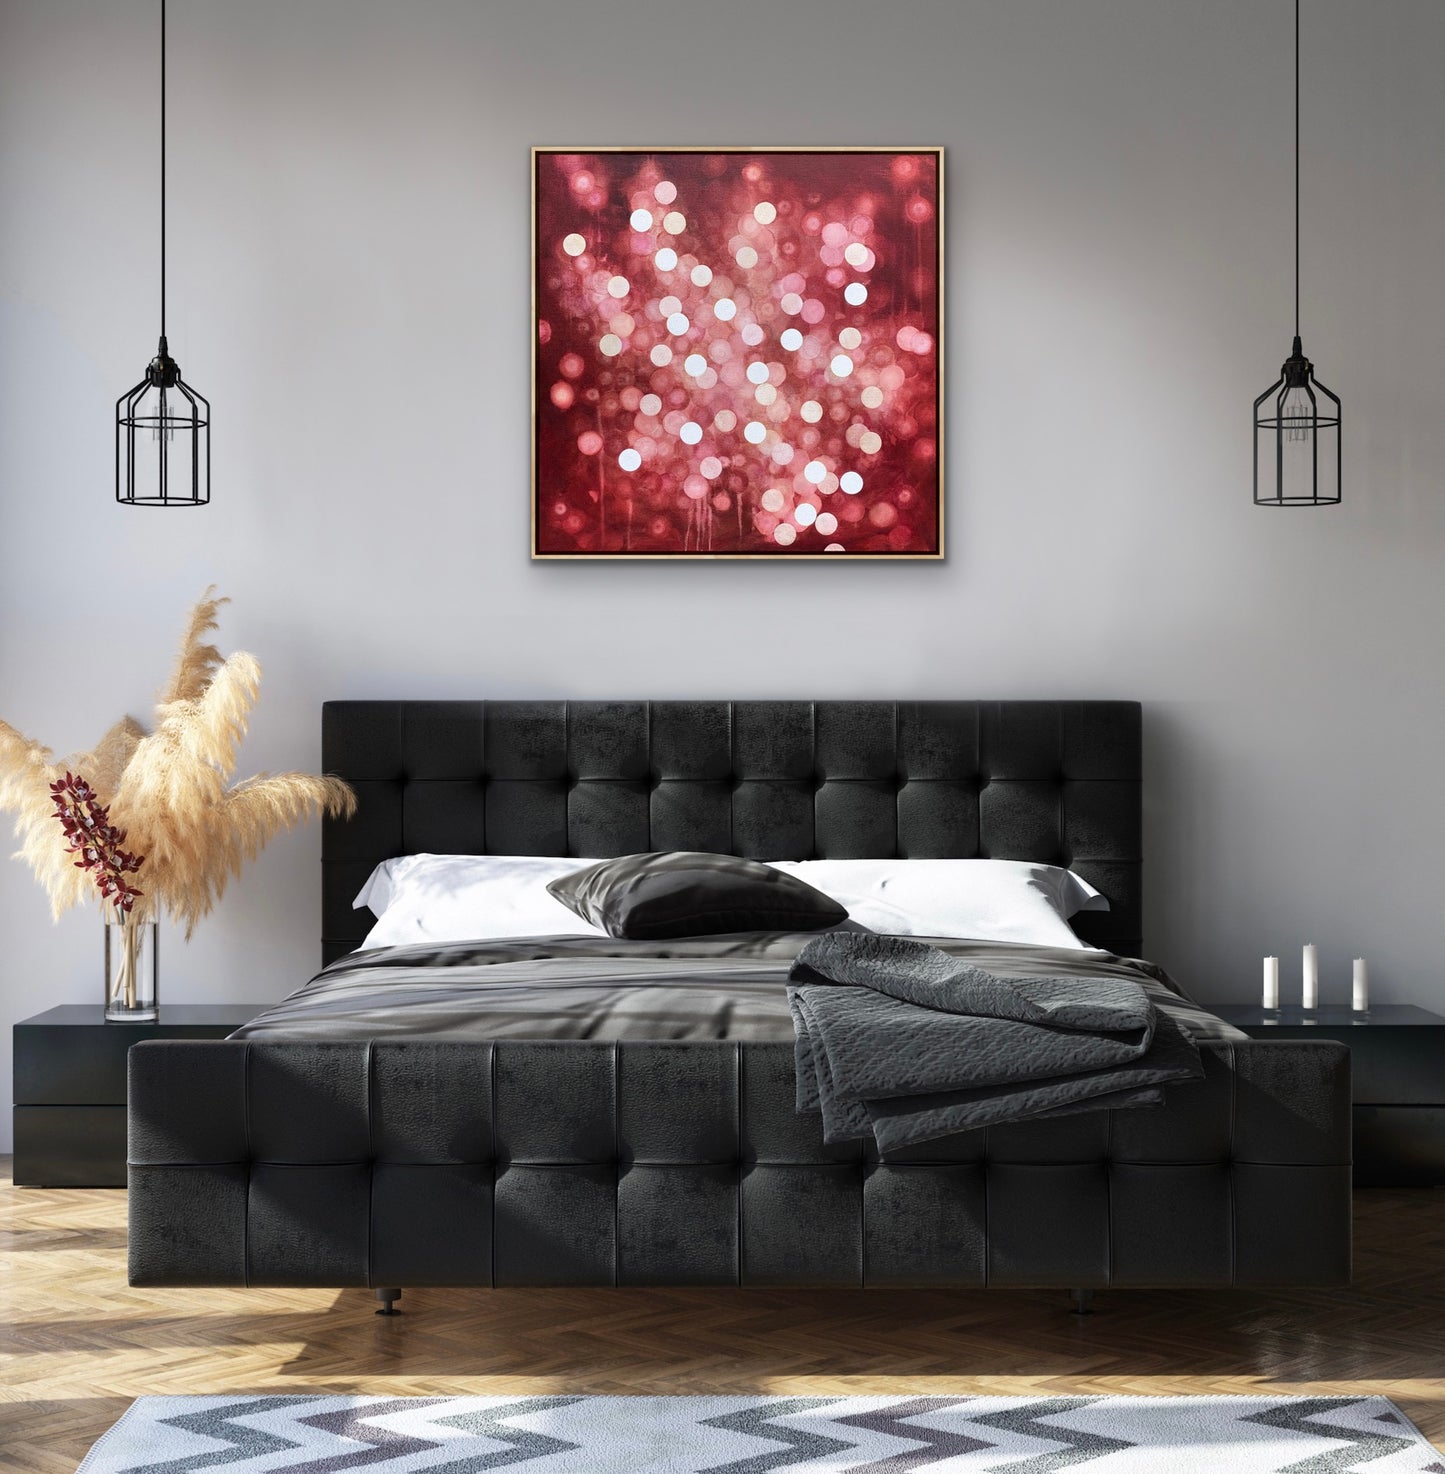 Aqueous Field Coral Bloom XV - Abstract Sealife Painting 79cm x 79cm